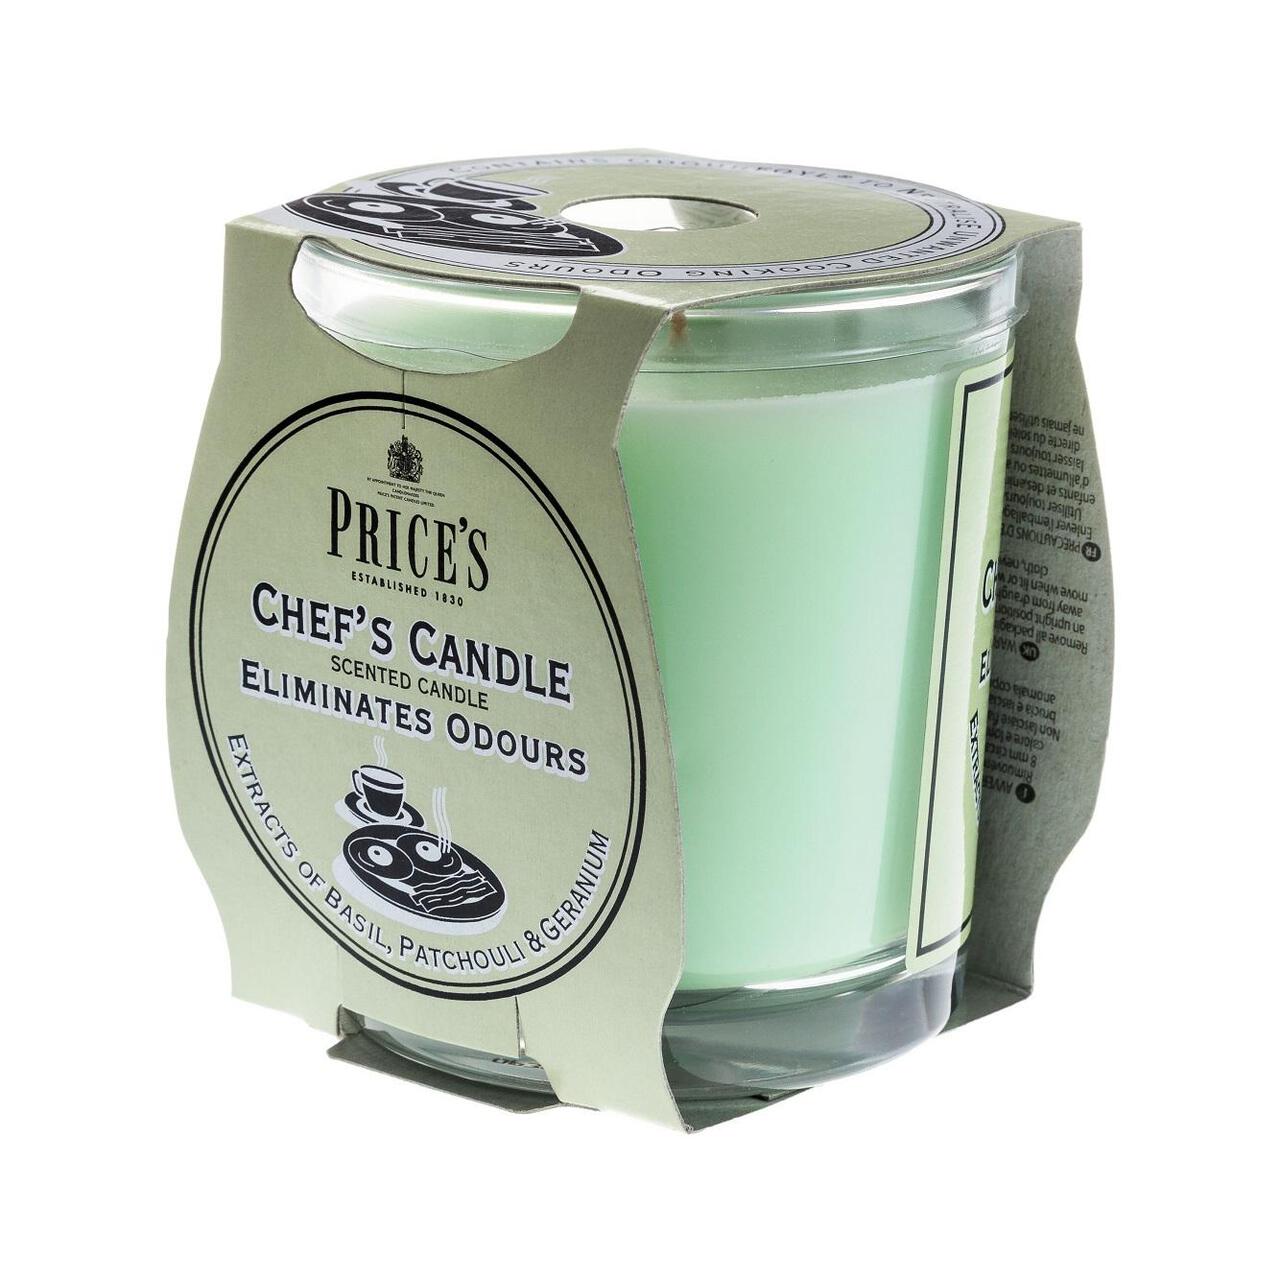 Price's Candles Chef's Odour Eliminating Jar